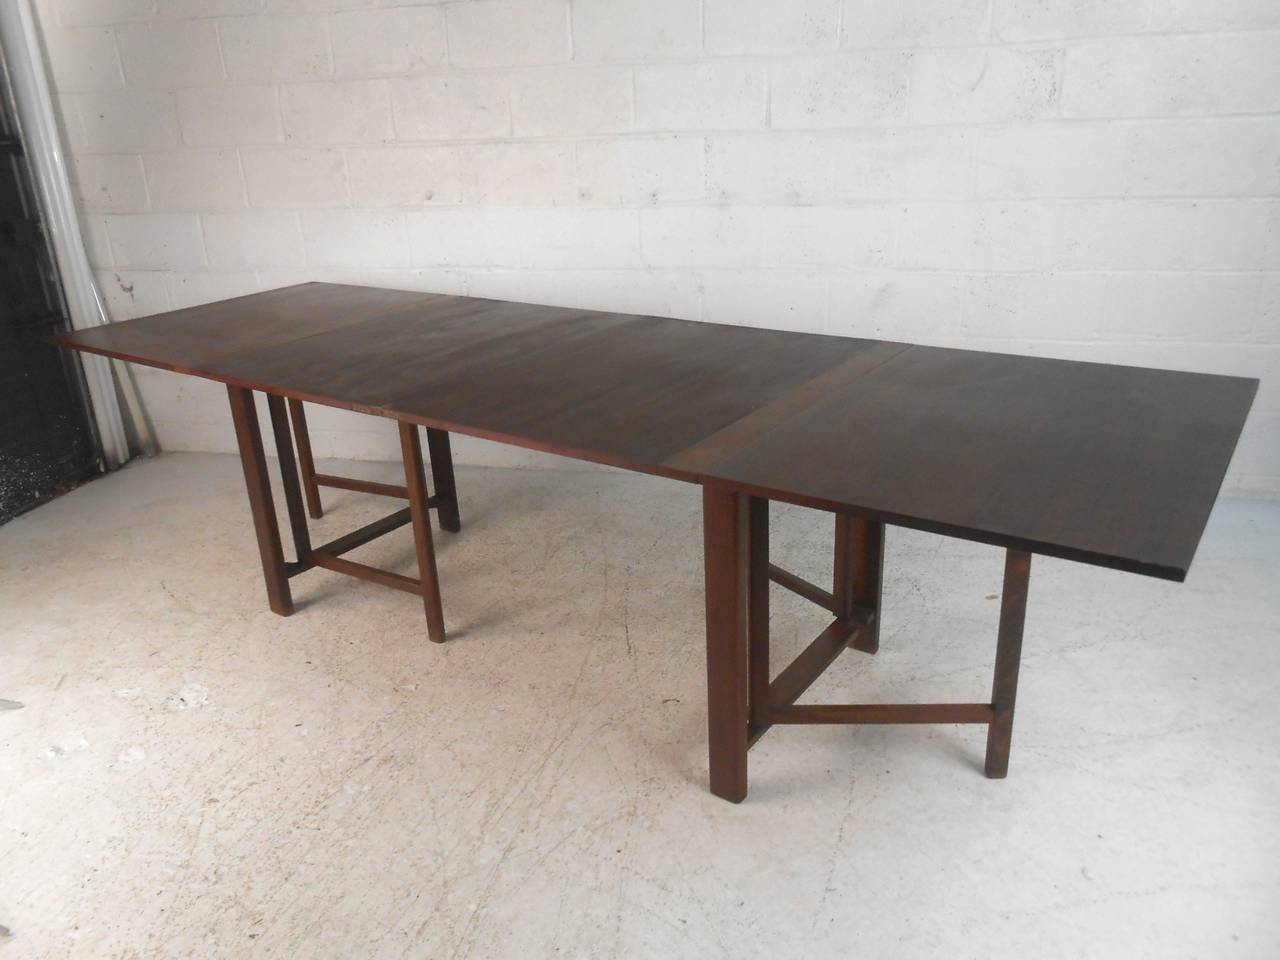 Vintage Danish drop-leaf table with multiple sizes, great for small dining areas. Can open one leaf (33